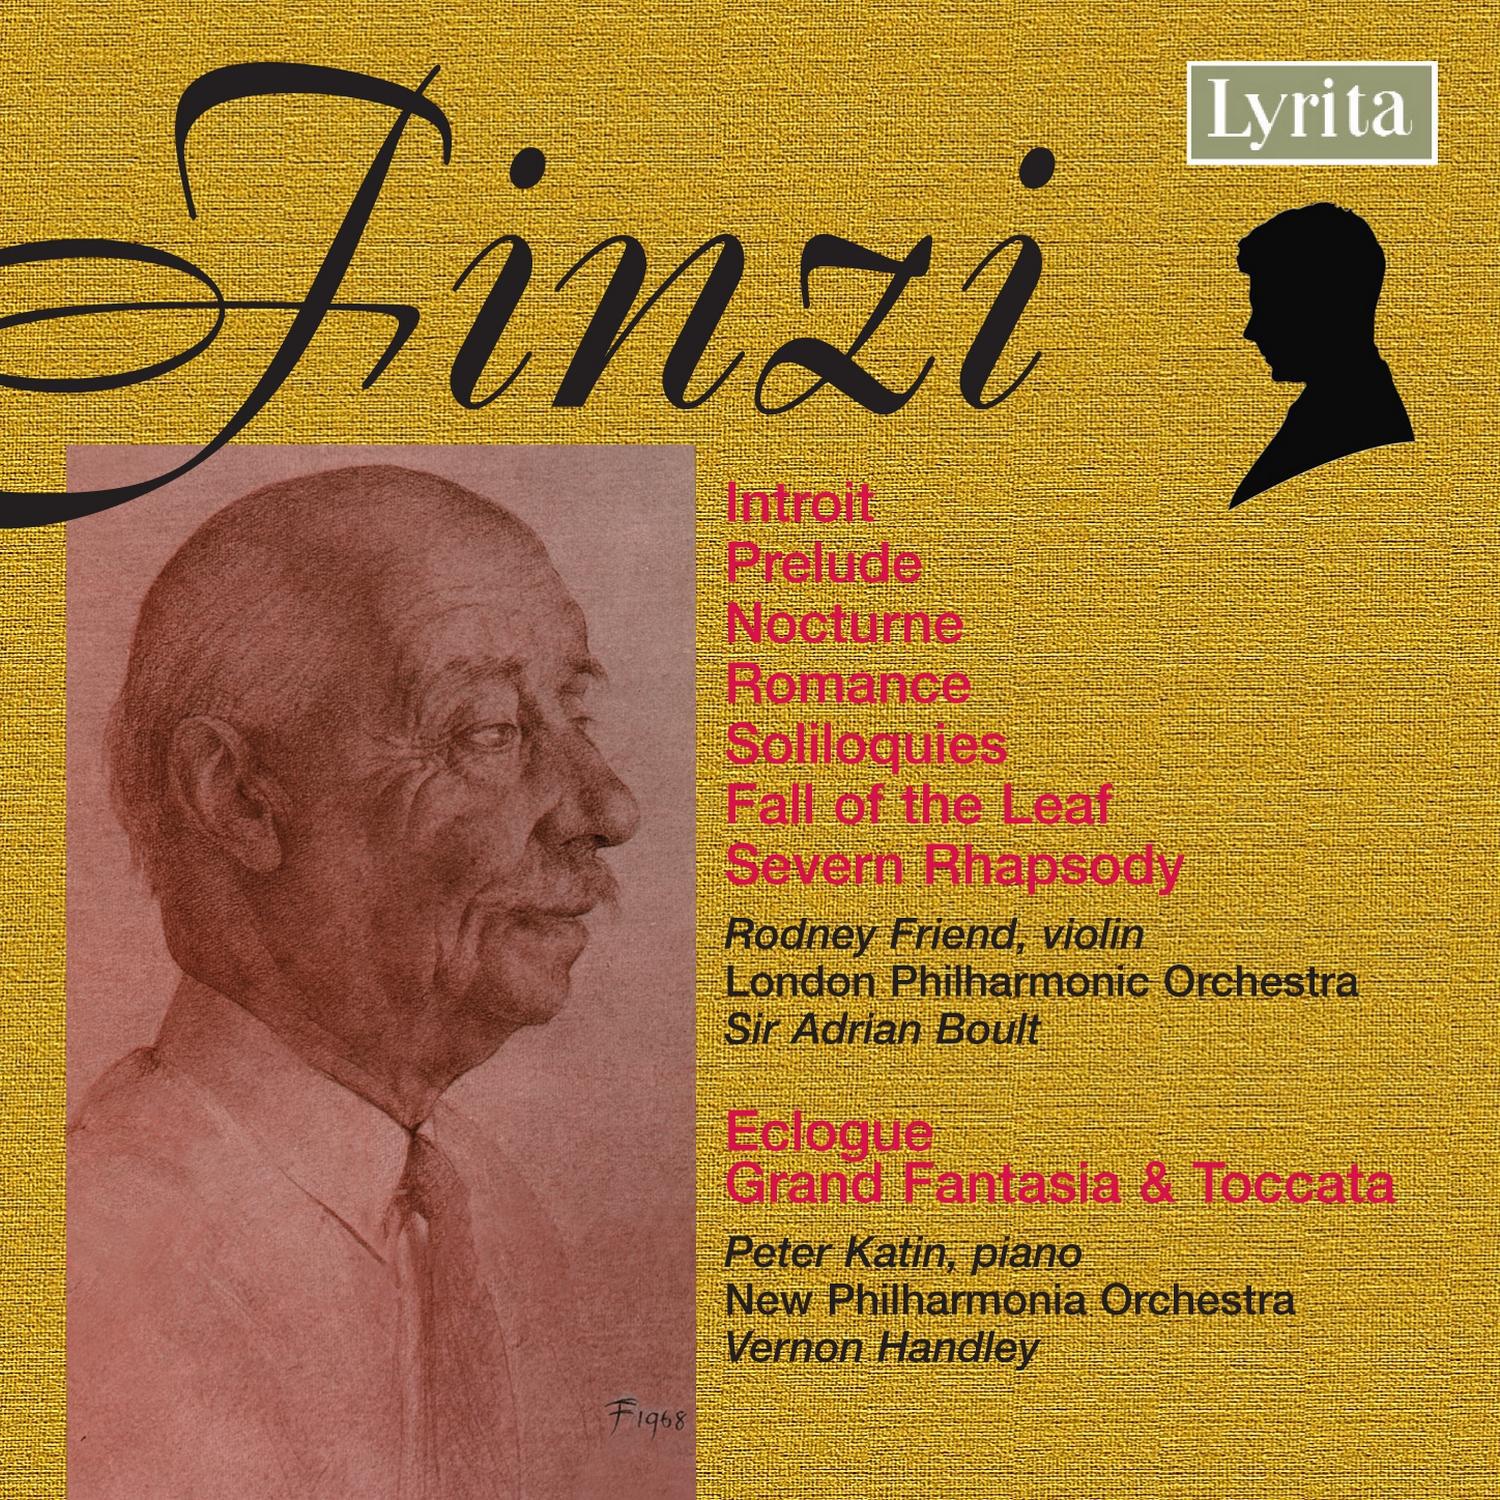 Grand Fantasia and Toccata for Piano and Orchestra, Op. 38